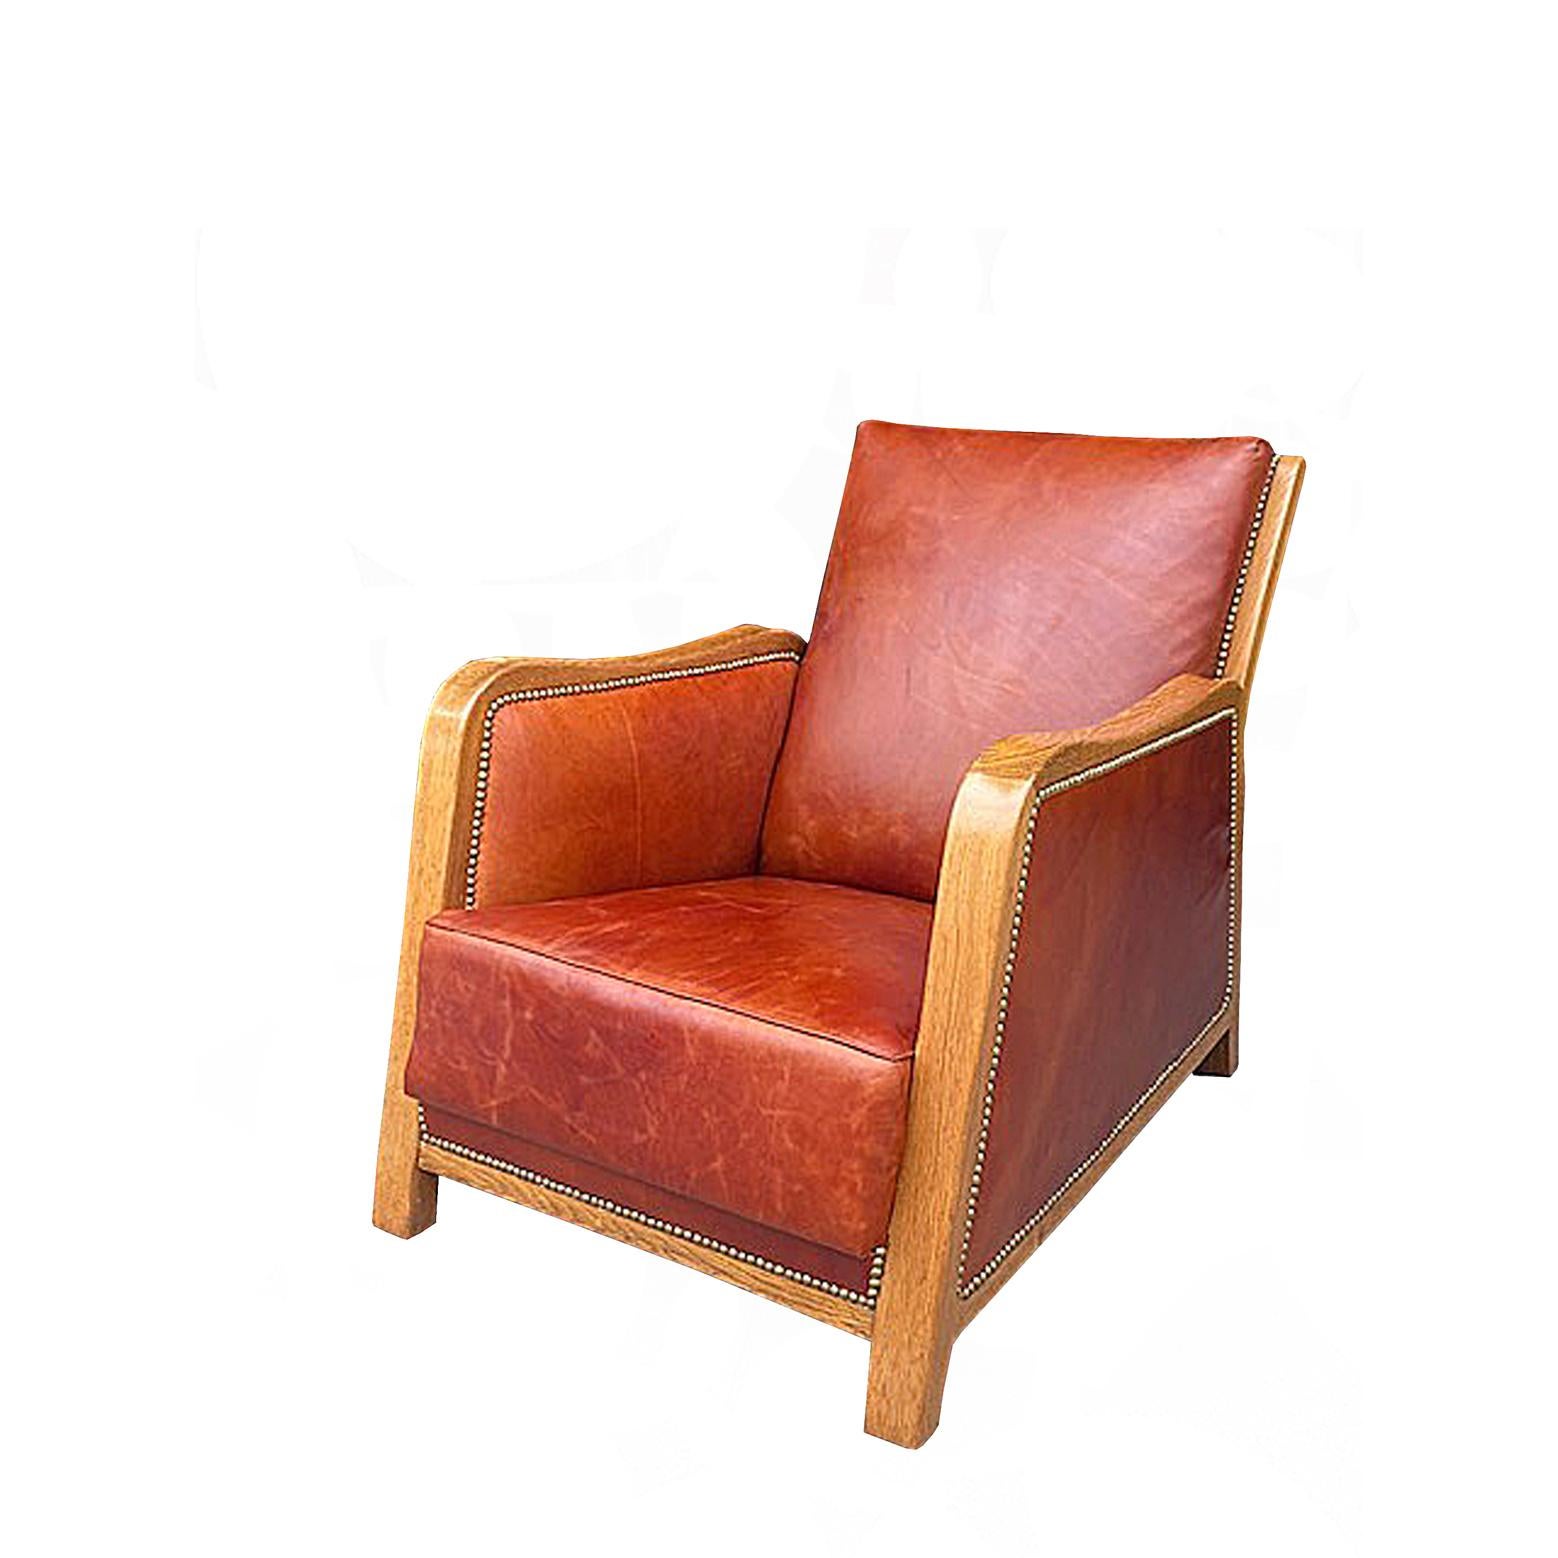 Rare design by Frits Henningsen and made by him 1930’s signed with design number and the date oak frame with cognac colour leather orly custom design.